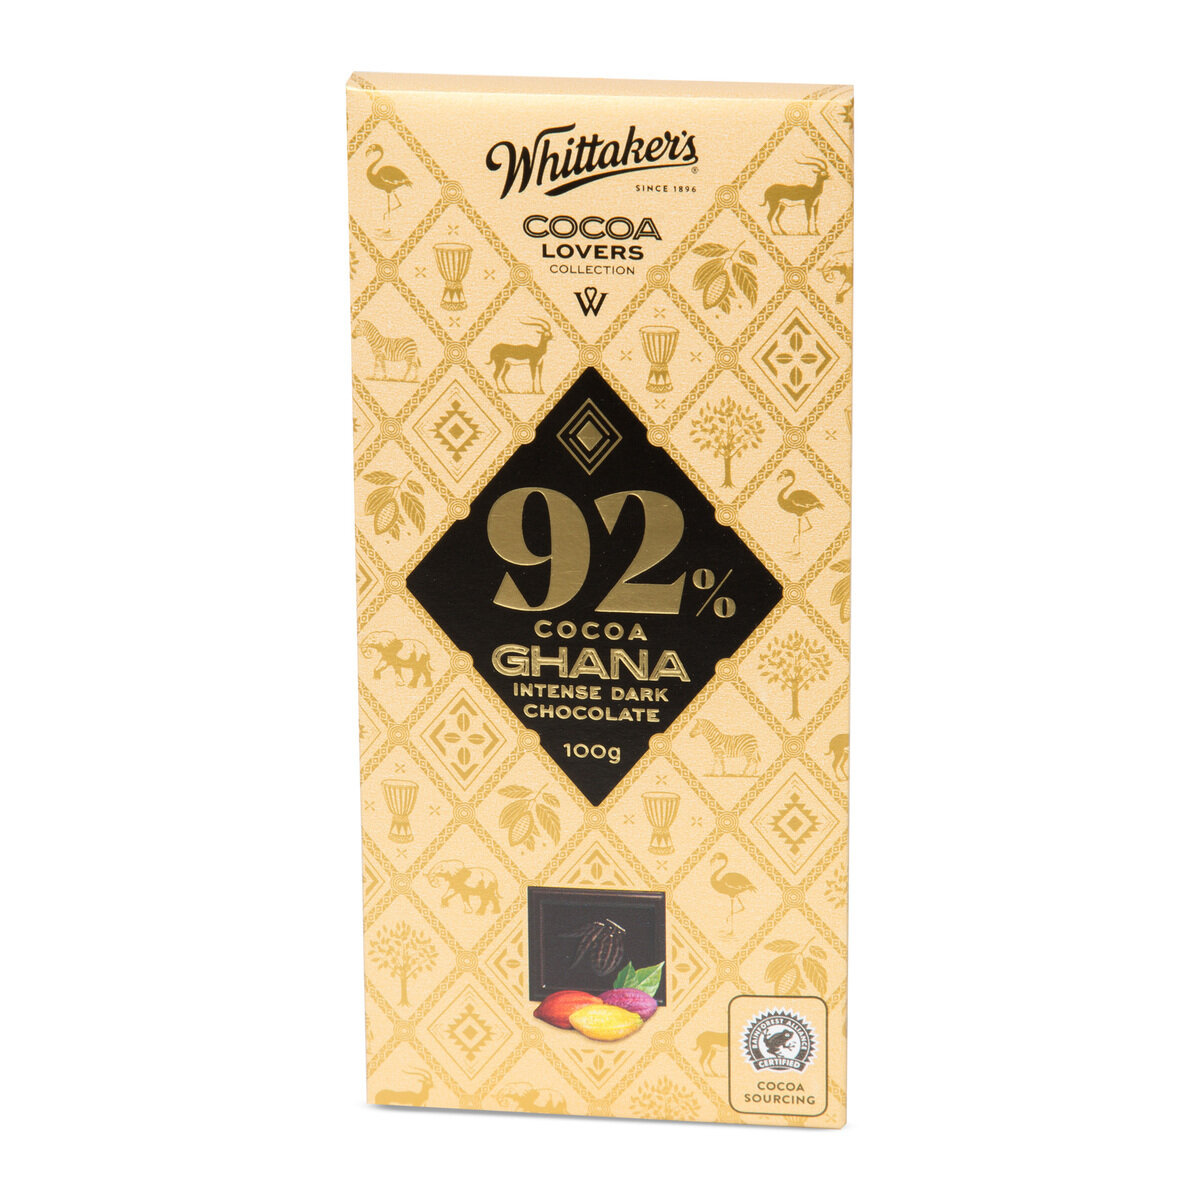 Whittaker's Cocoa Lovers Collection 92% 100G